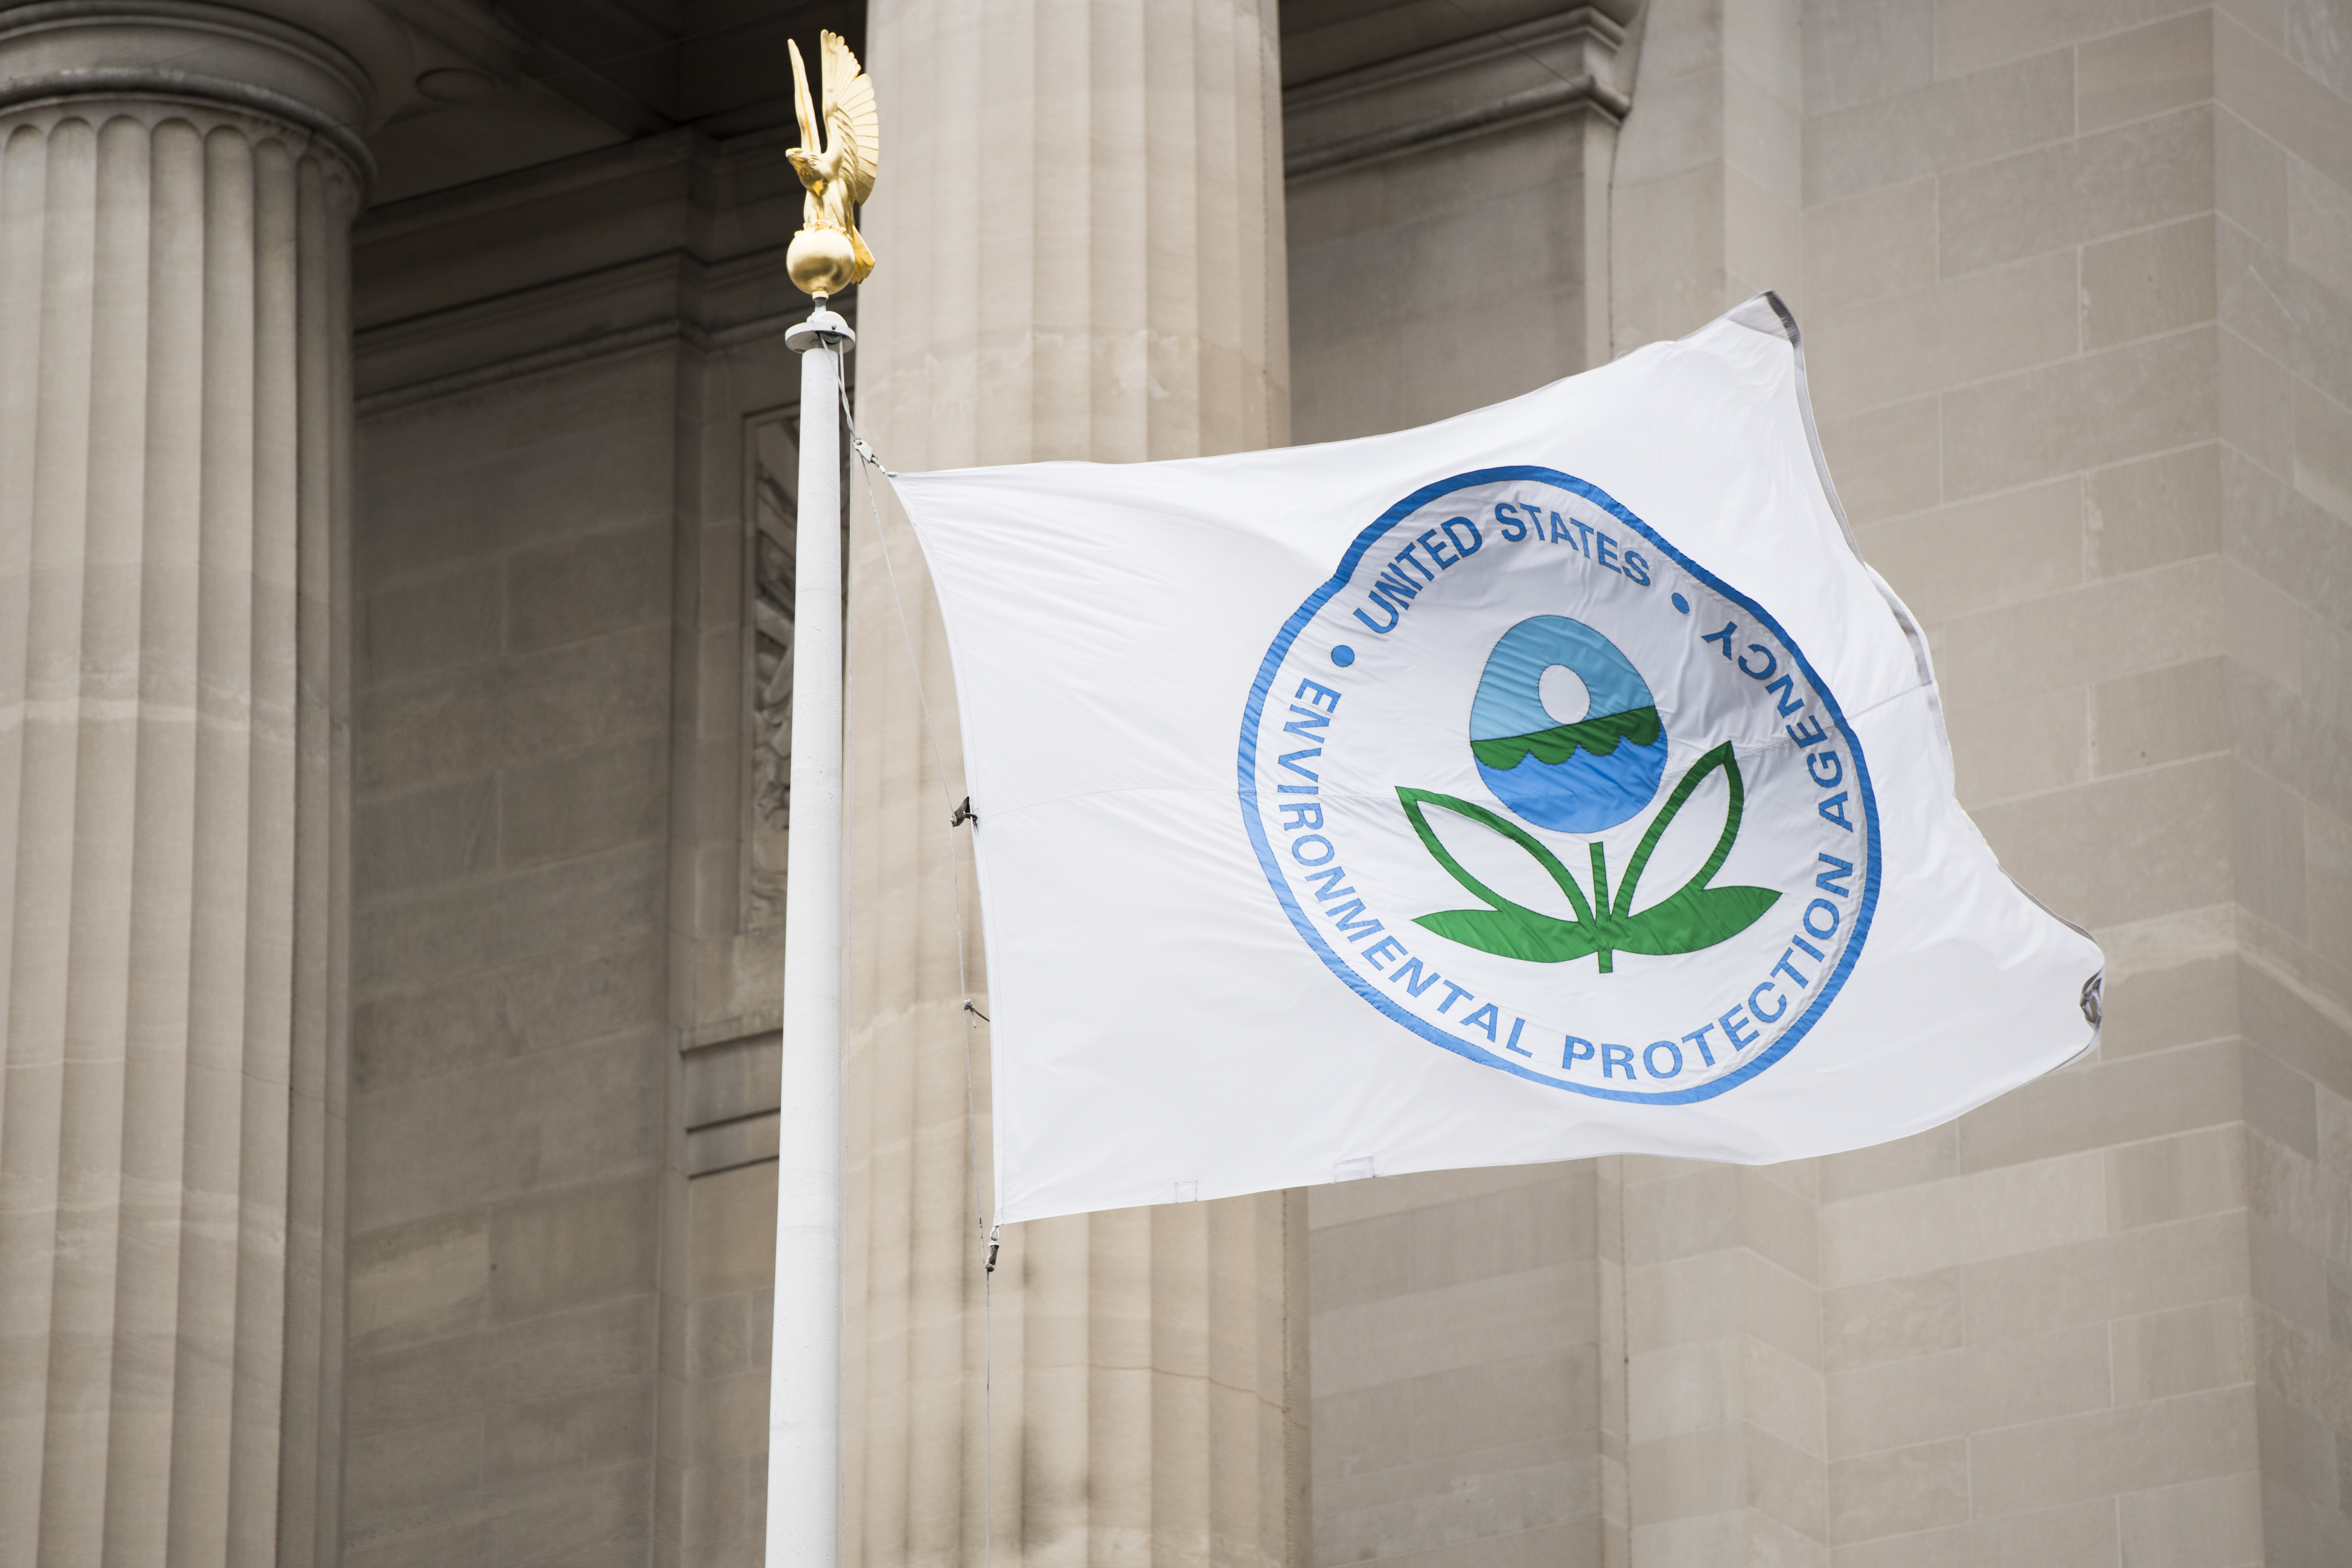 A flag with the EPA logo flies in front of the Environmental Protection Agency.